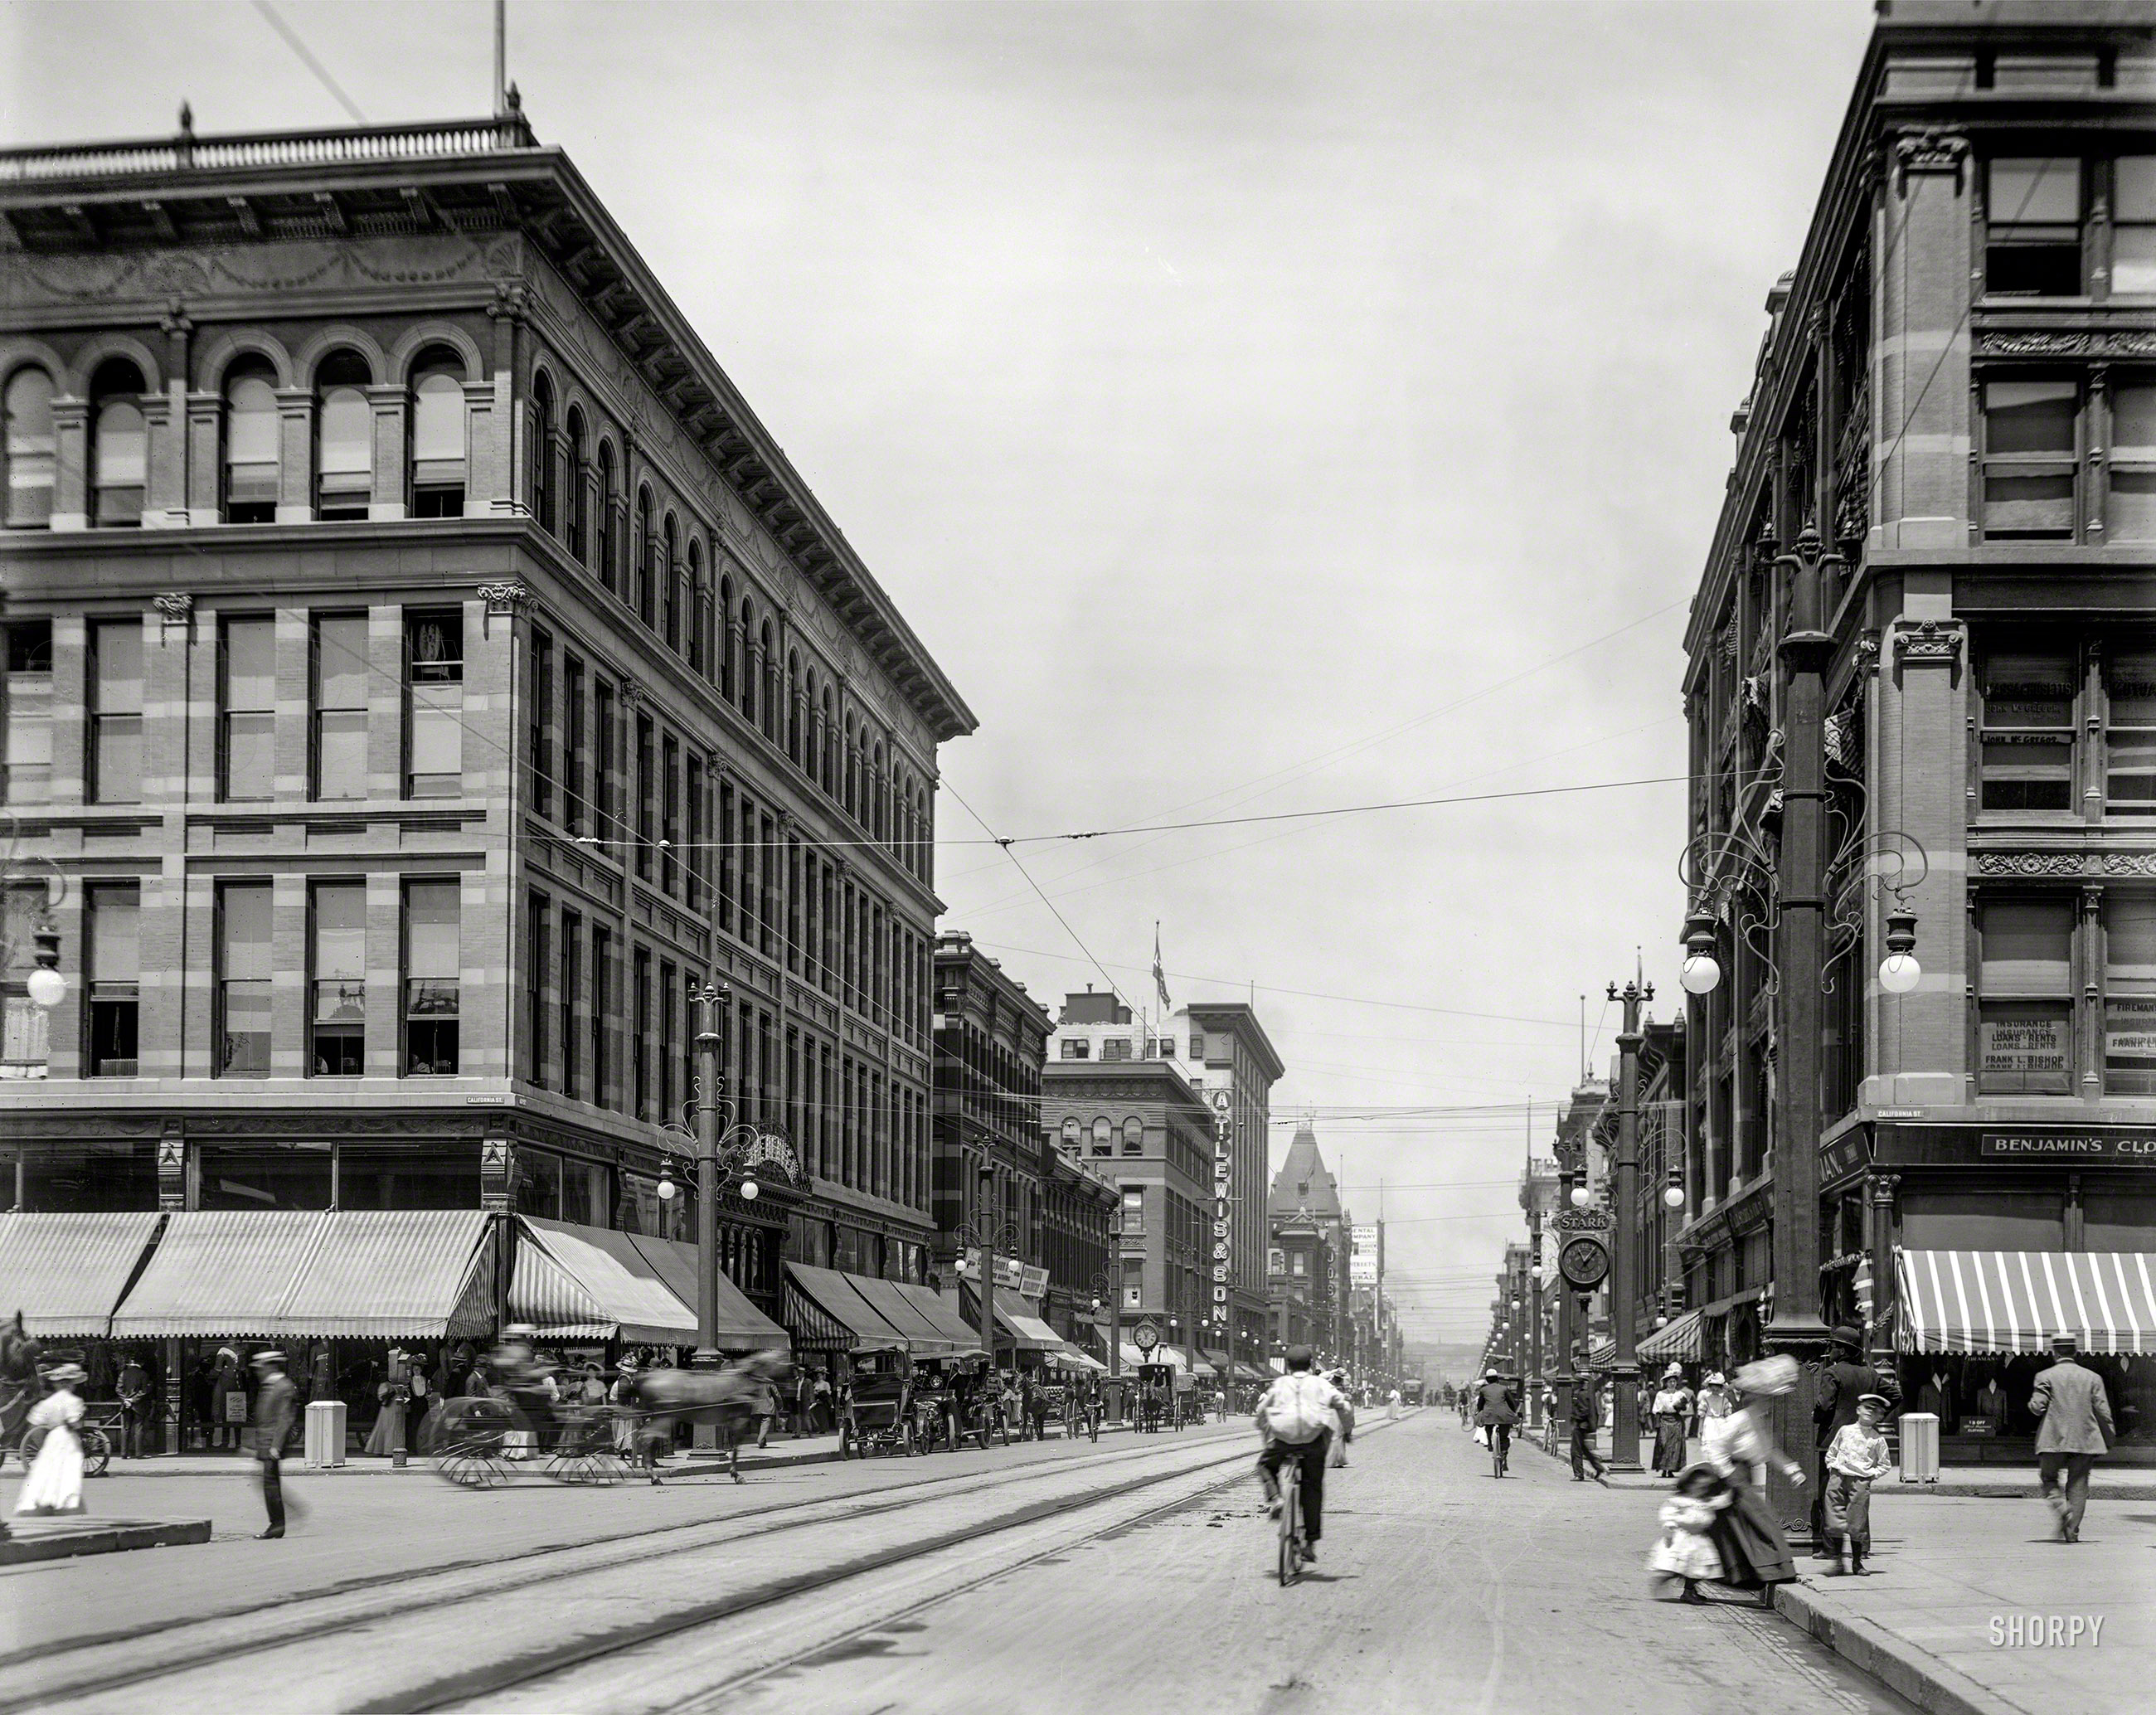 Denver, Colorado, circa 1908. "Sixteenth Street at California Street." At 11:06. 8x10 inch dry plate glass negative, Detroit Publishing Company. View full size.